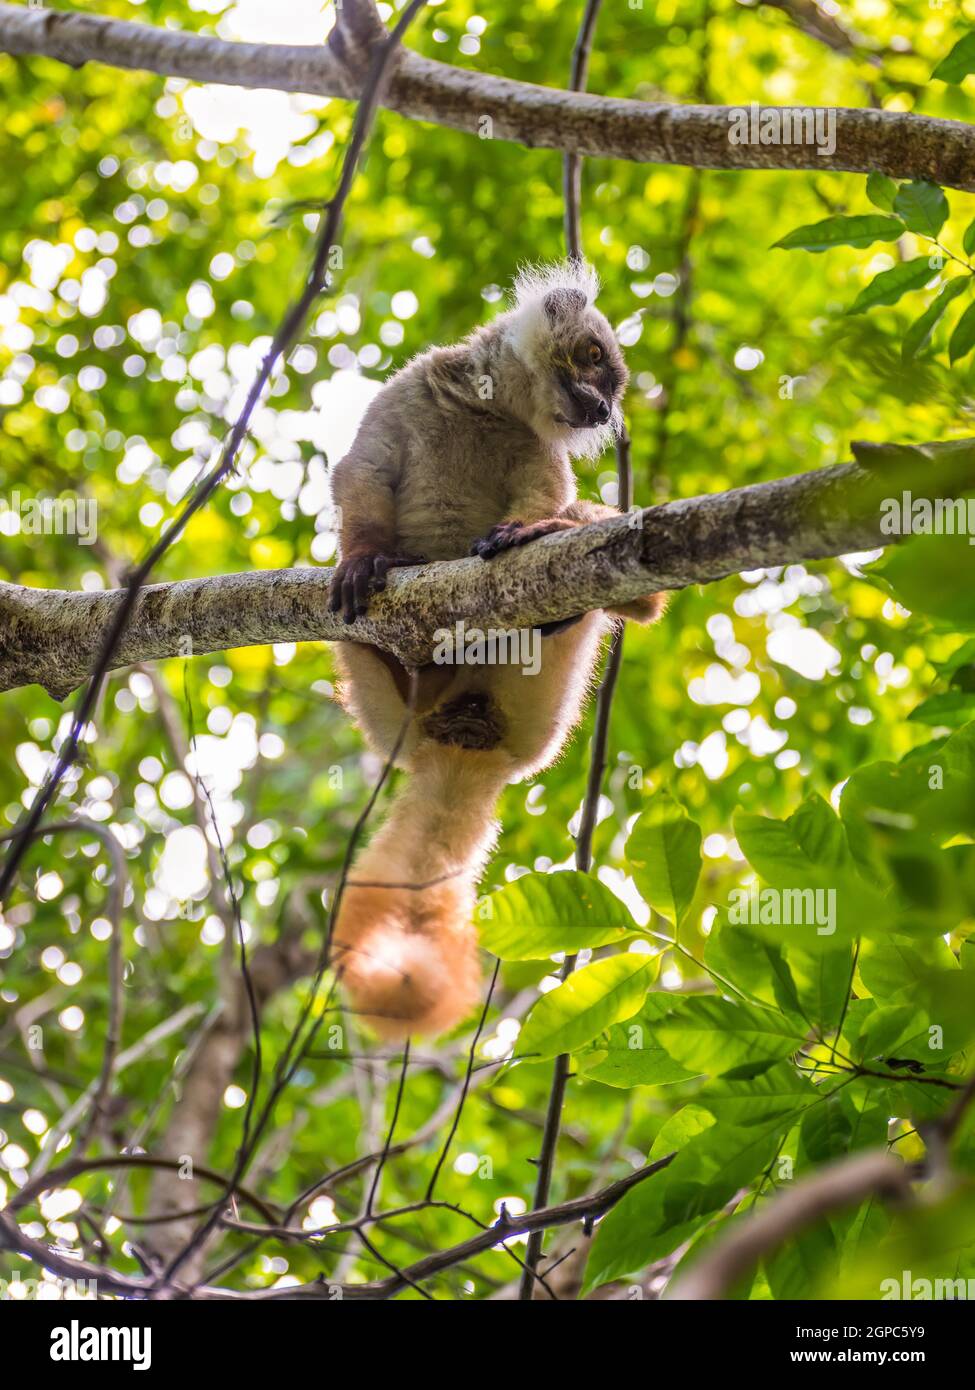 Lemur in their natural habitat, Lokobe Strict Nature Reserve in Nosy Be, Madagascar, Africa Stock Photo